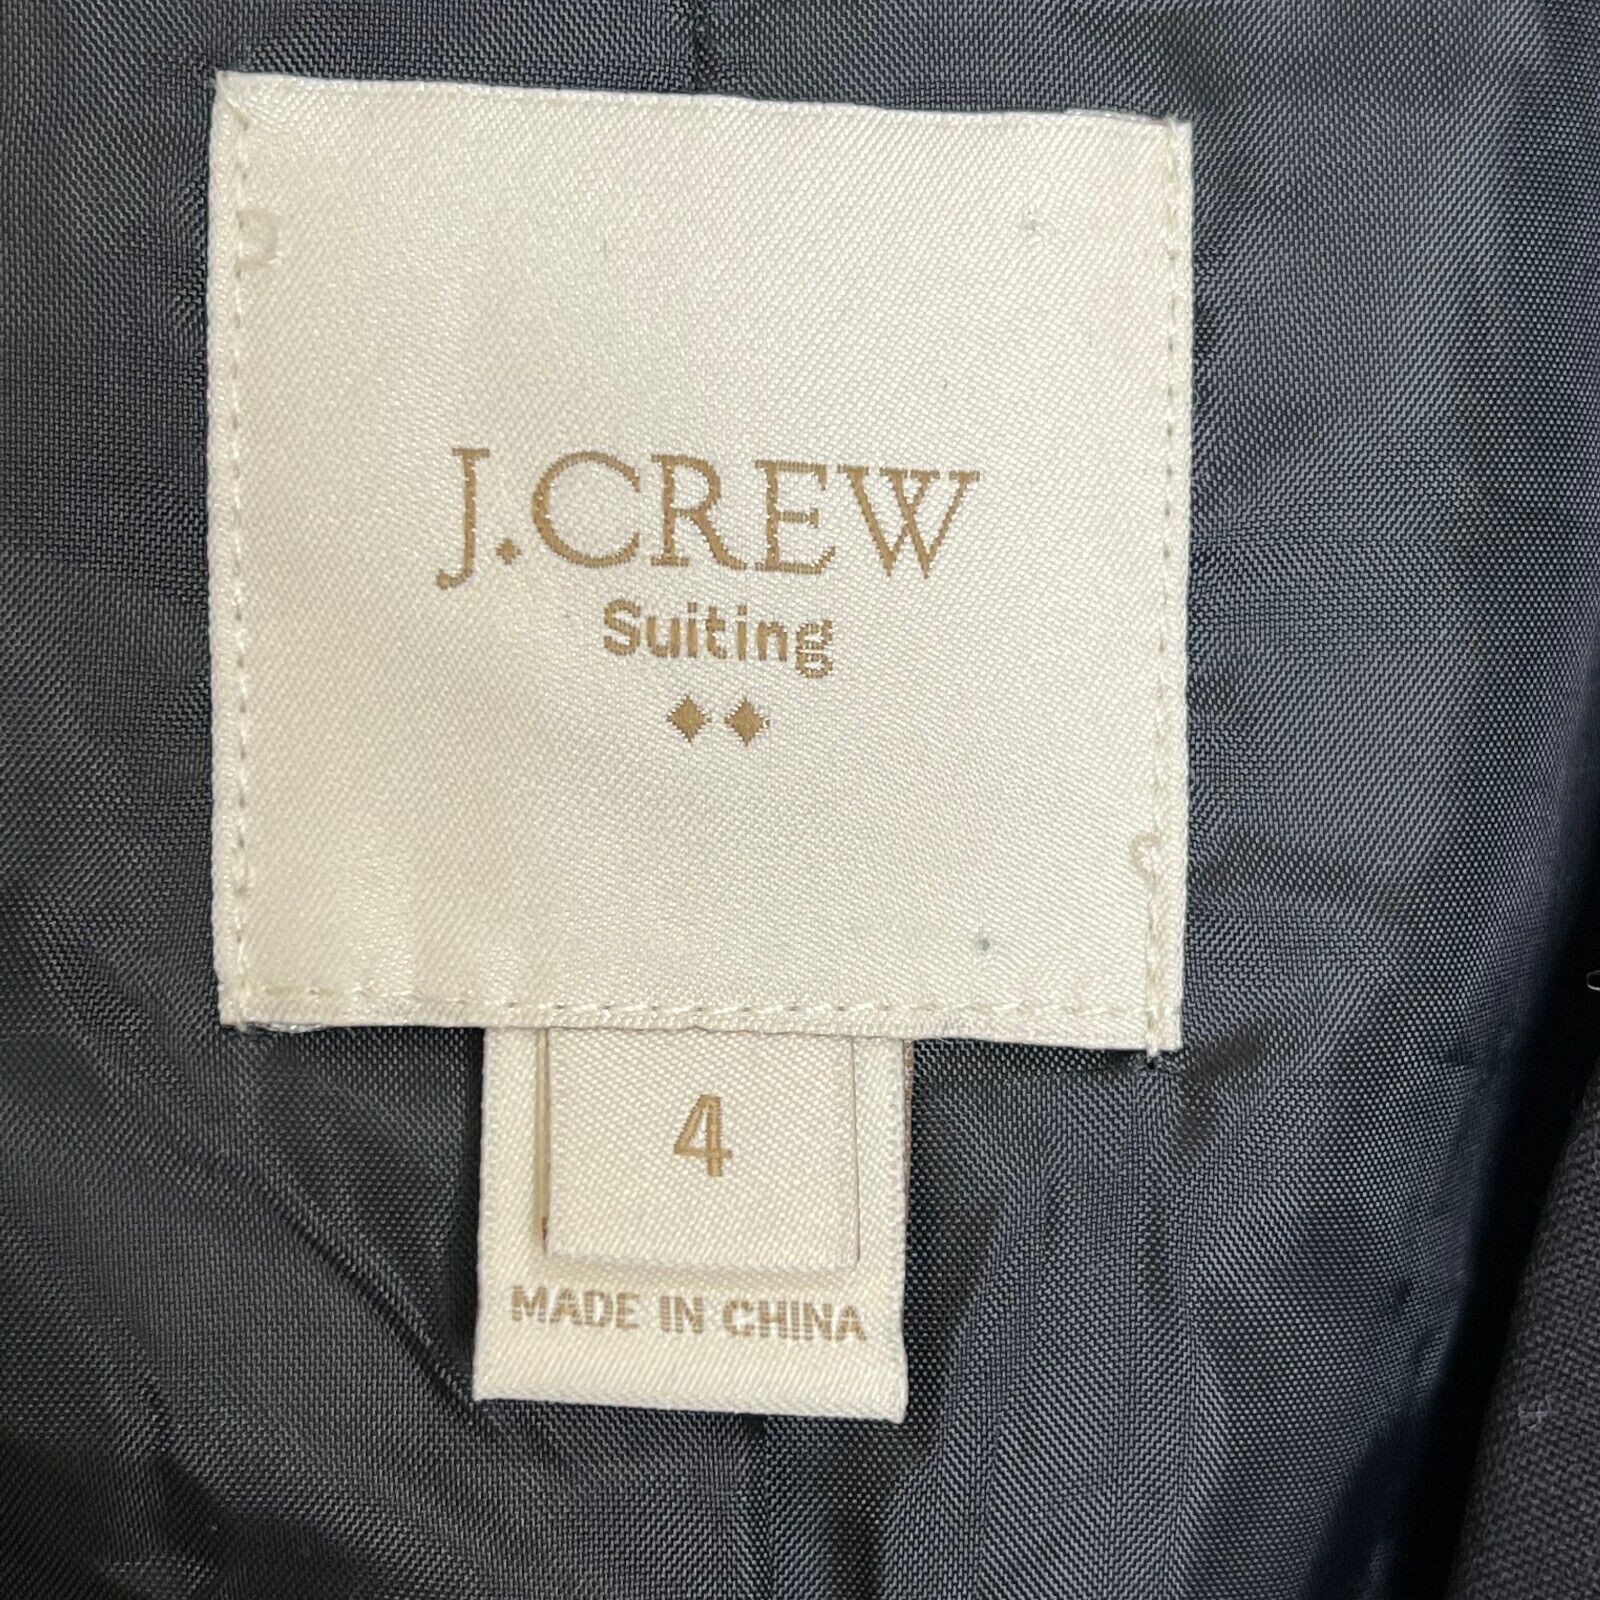 J. Crew Suiting Black Blazer Jacket Lightweight Wool Two Button Lined Size 4